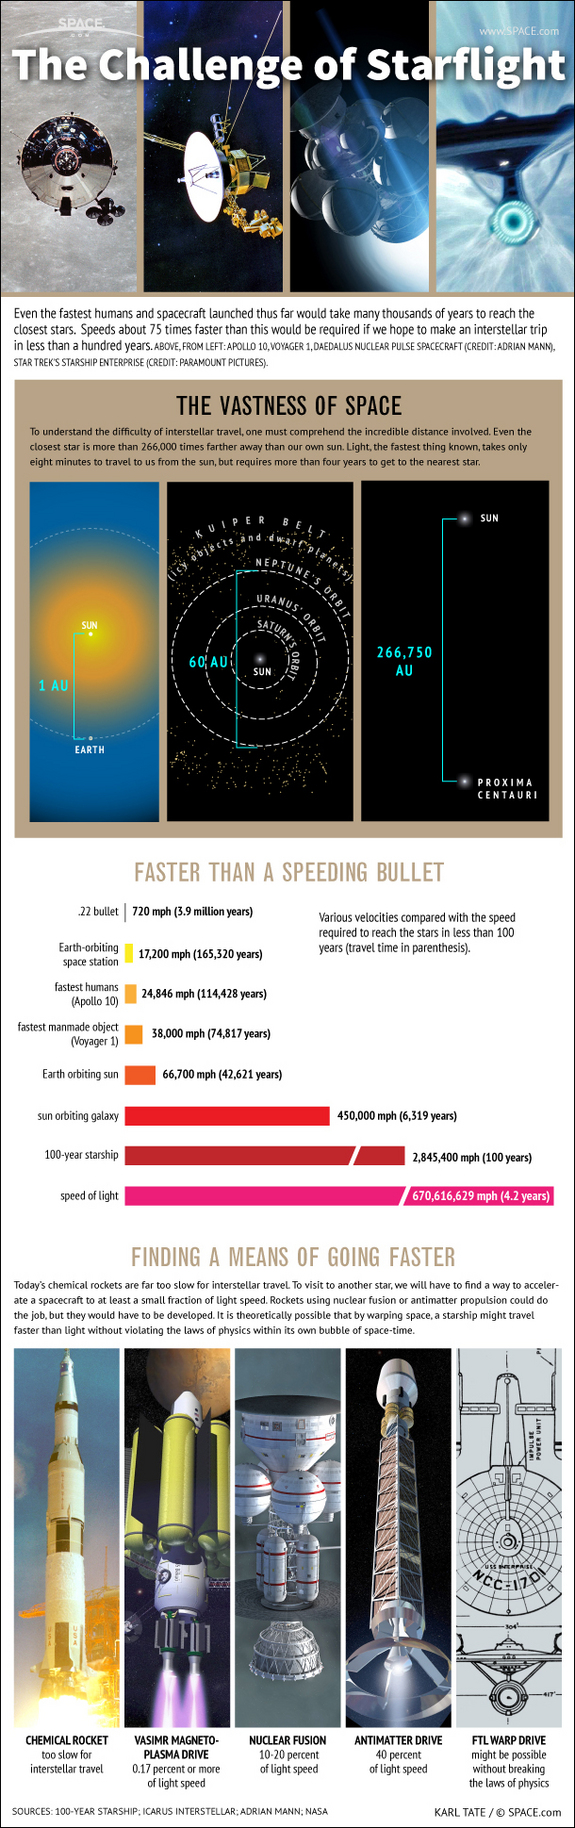 Find out what humans would have to do to travel to the stars, in this SPACE.com infographic.